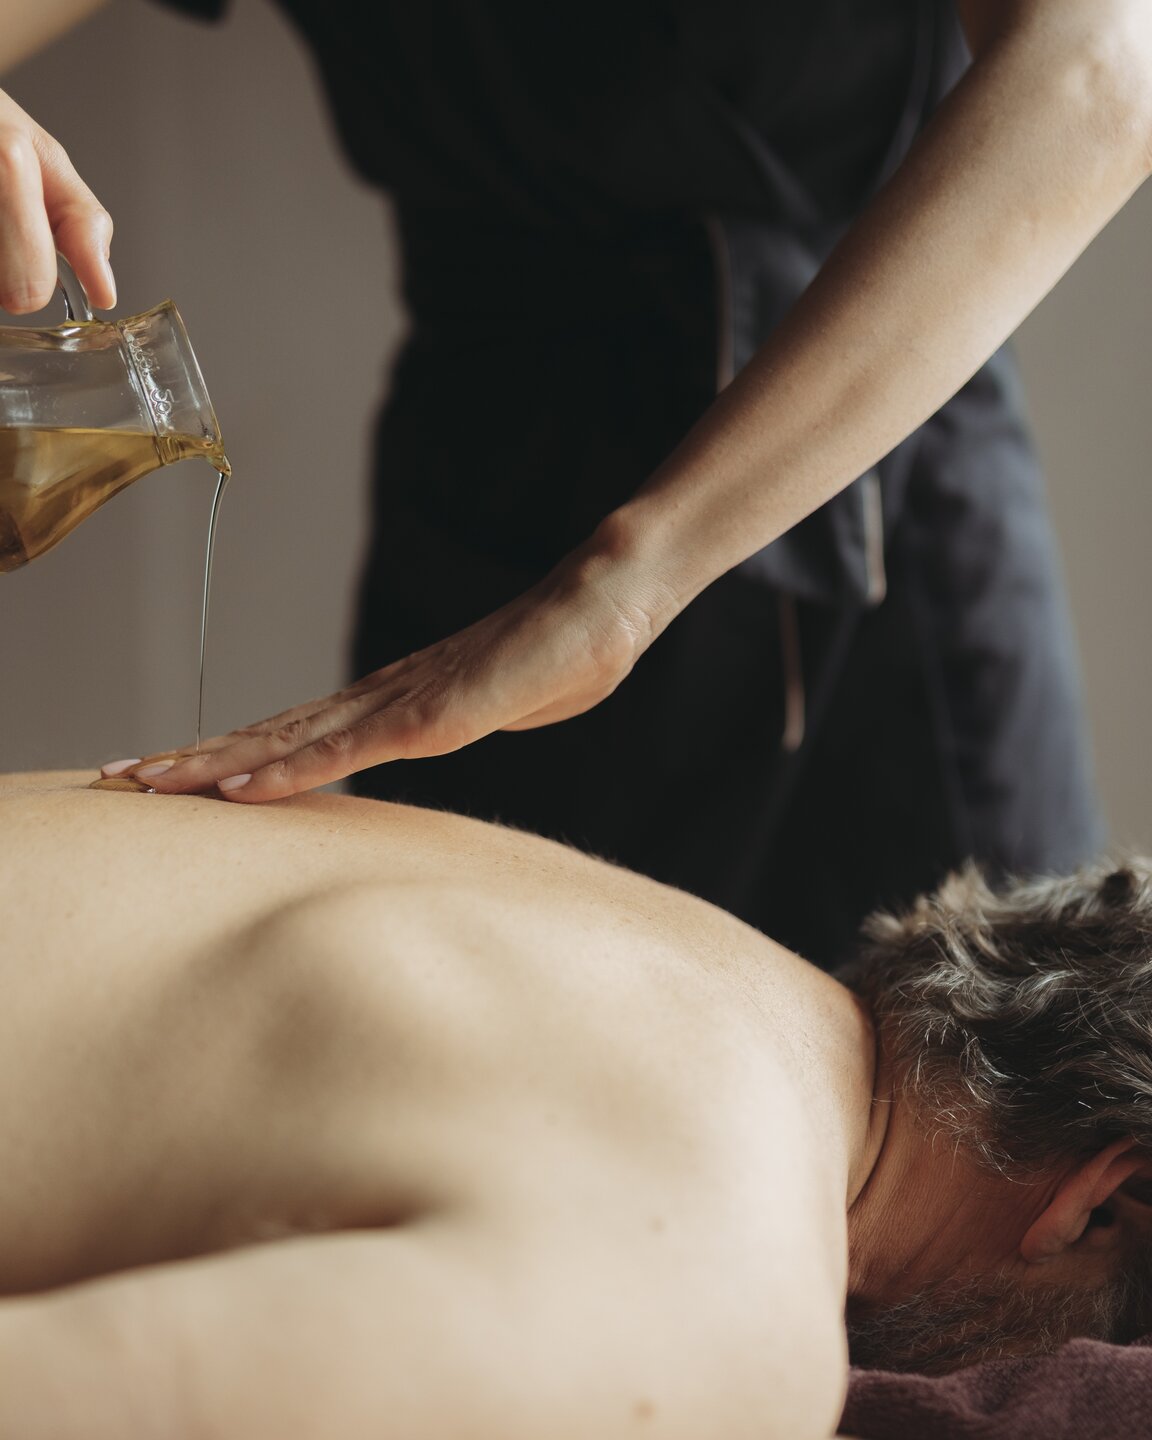 massage with oil on a holiday